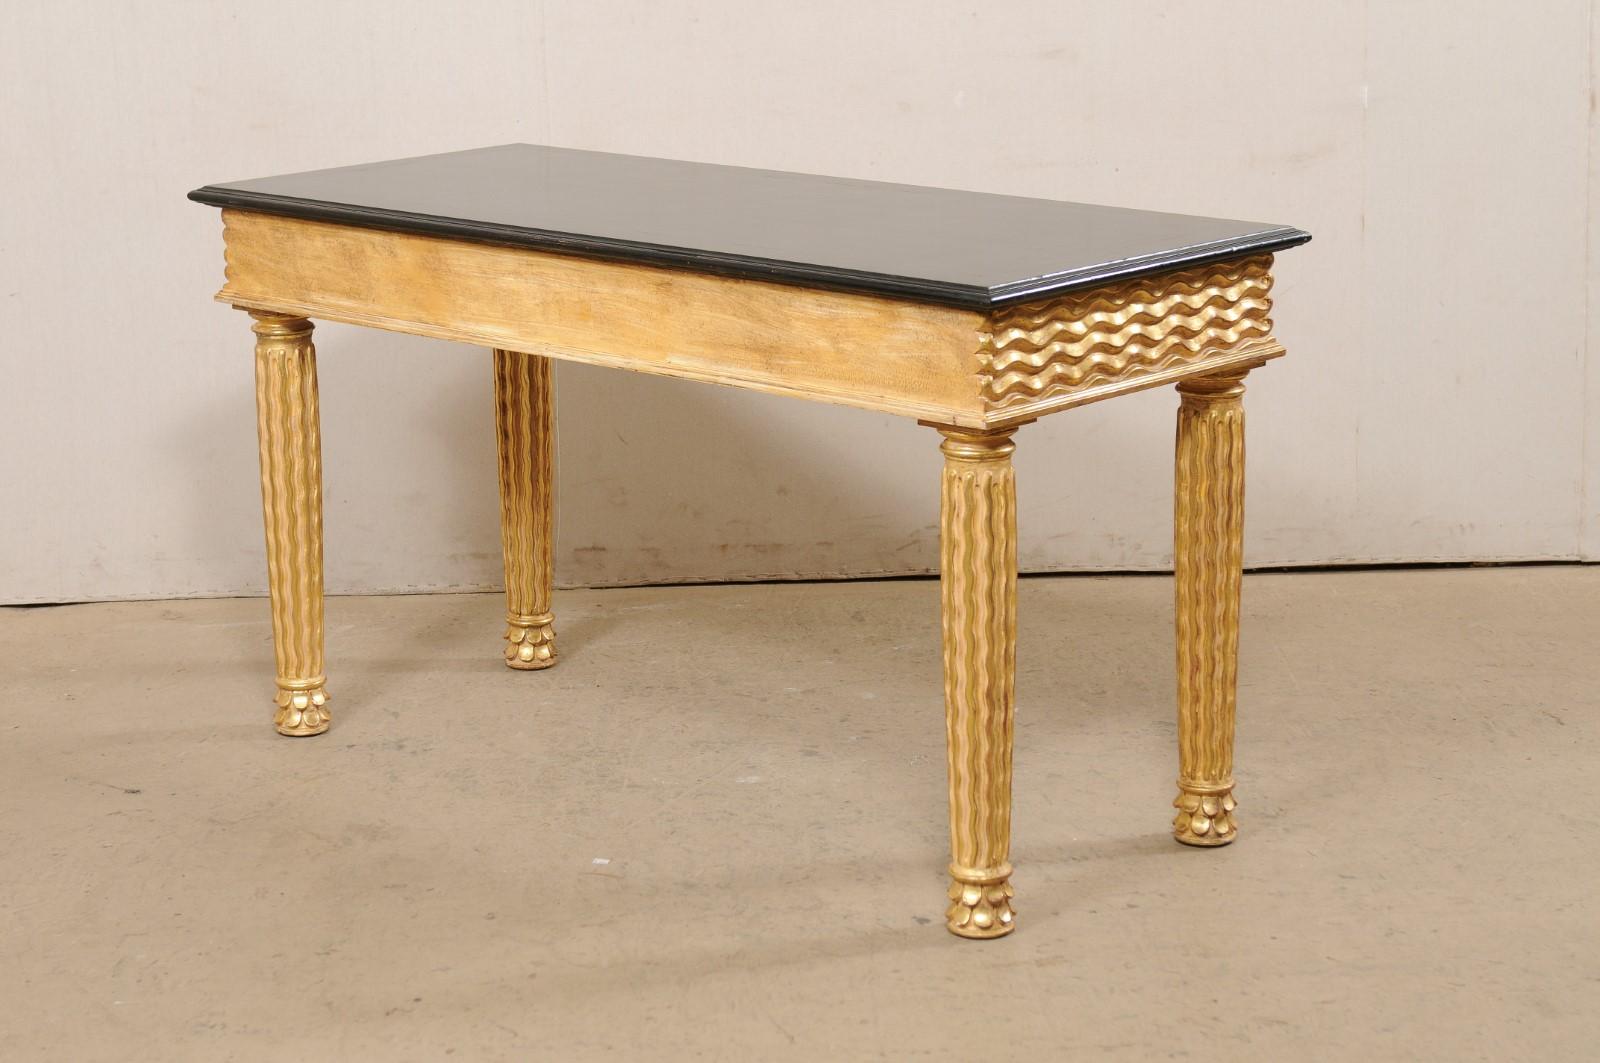 Italian Masterfully Hand-Carved Wooden Console Table with Real Gold Leafing For Sale 3